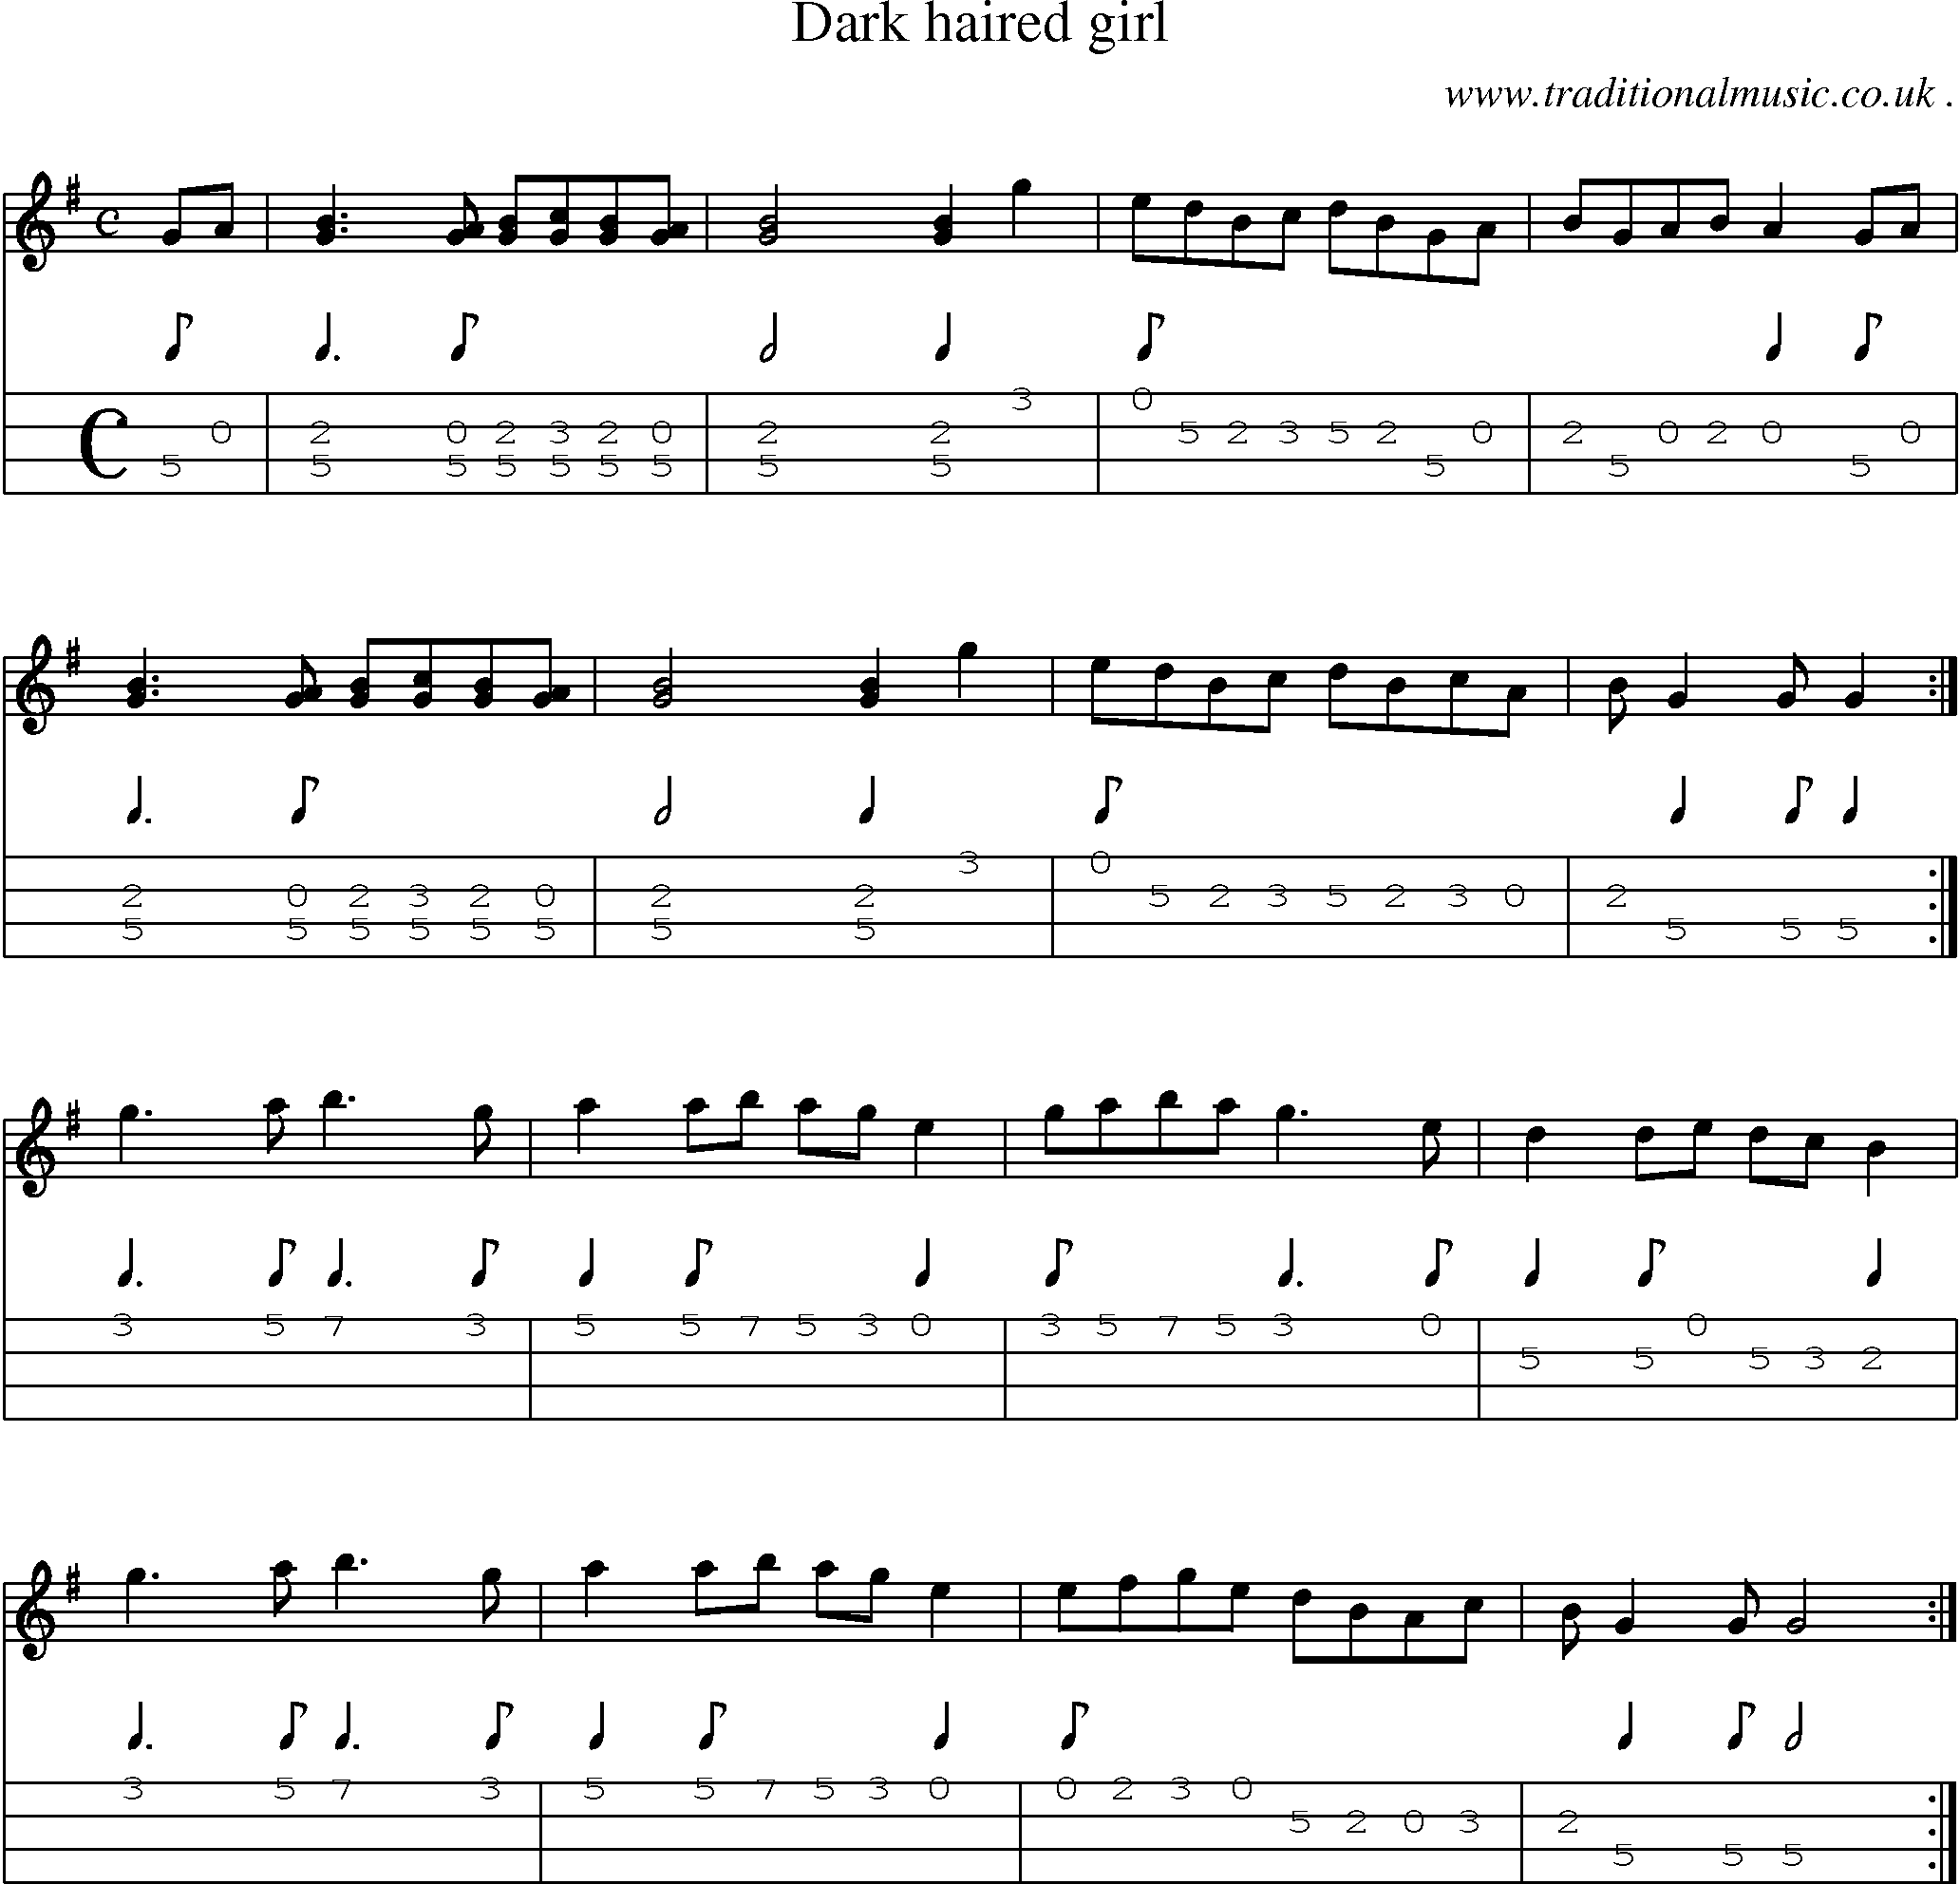 Sheet-music  score, Chords and Mandolin Tabs for Dark Haired Girl